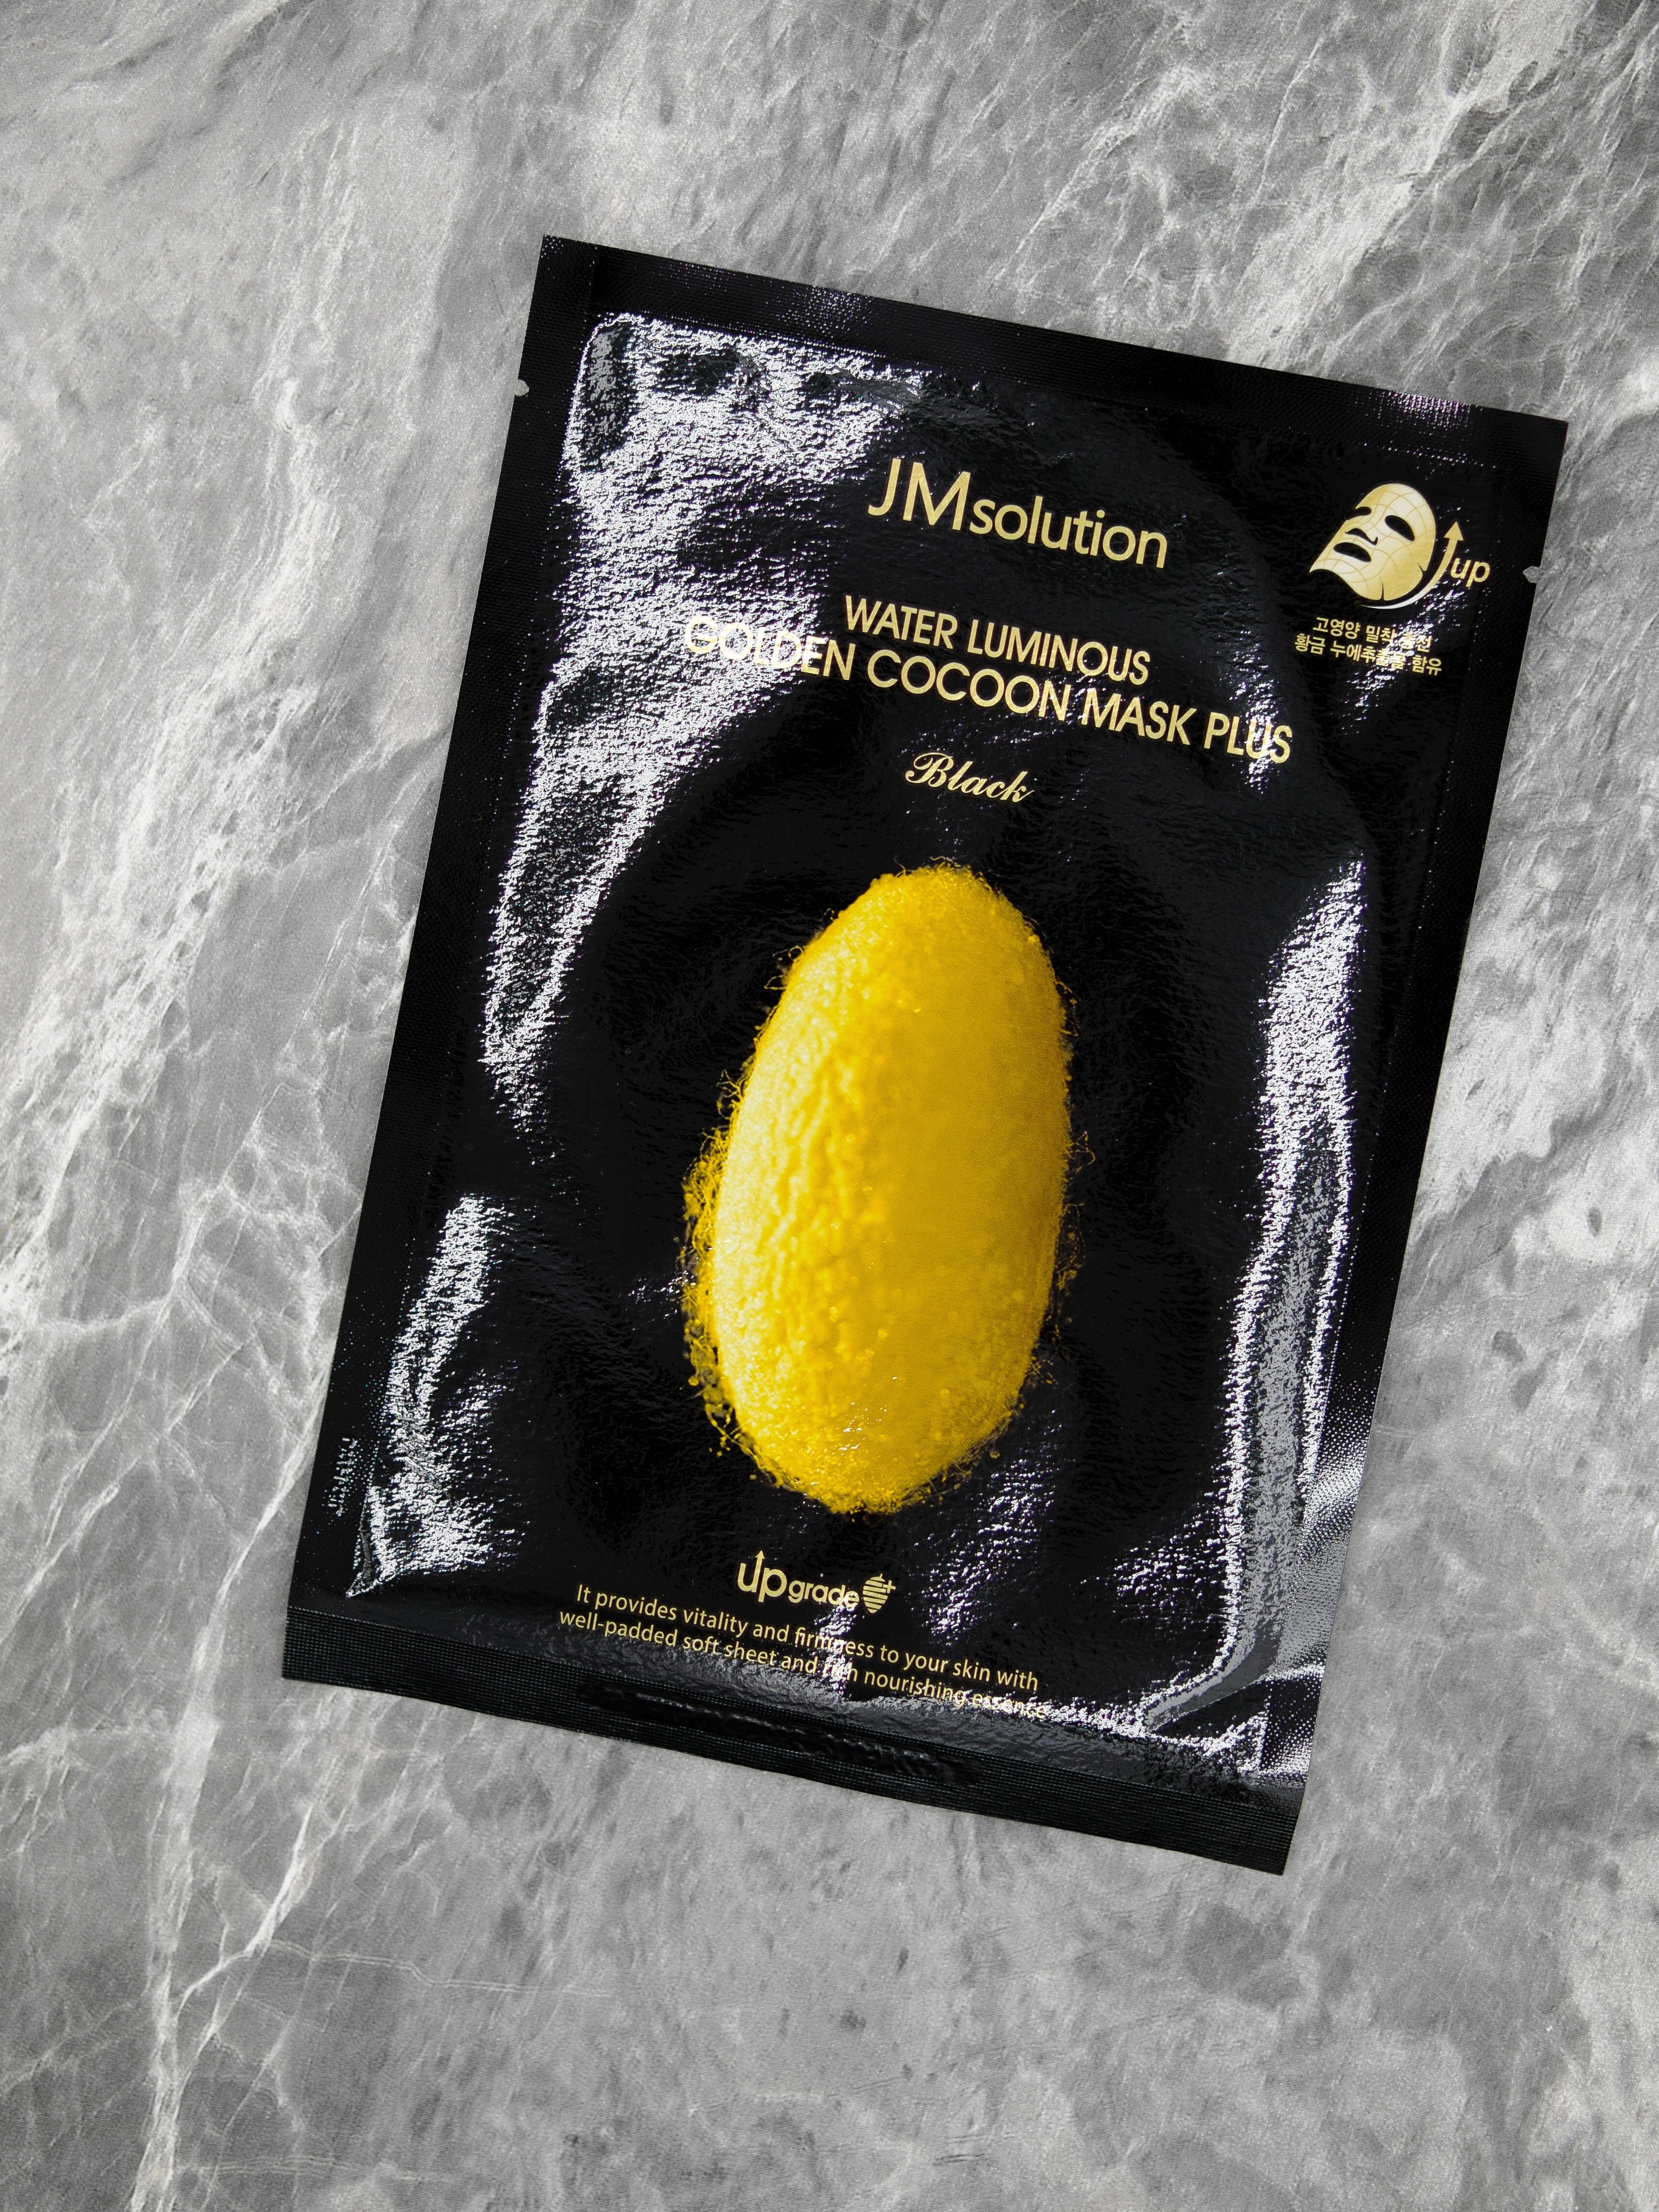 JM solution Water Luminous Golden Cocoon Mask Plus | Song of Skin